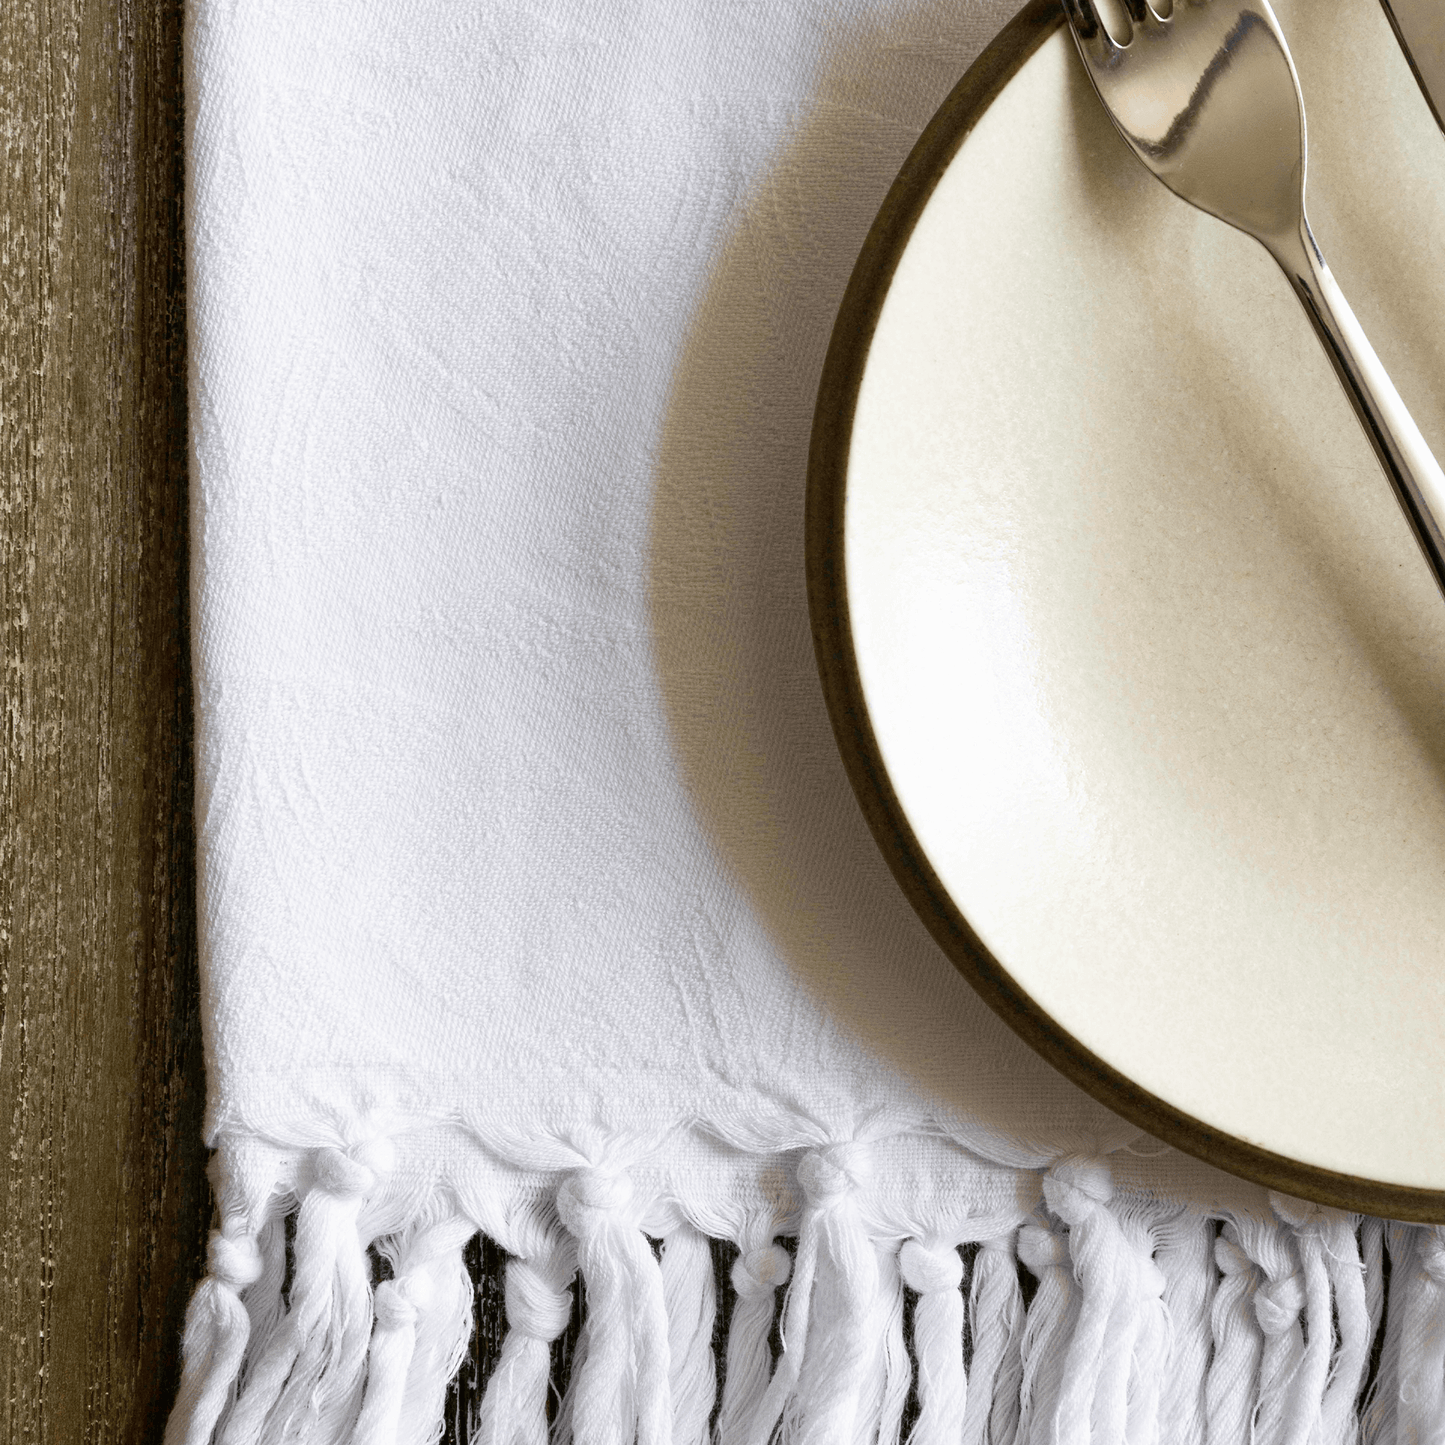  White Turkish towel with dinner place